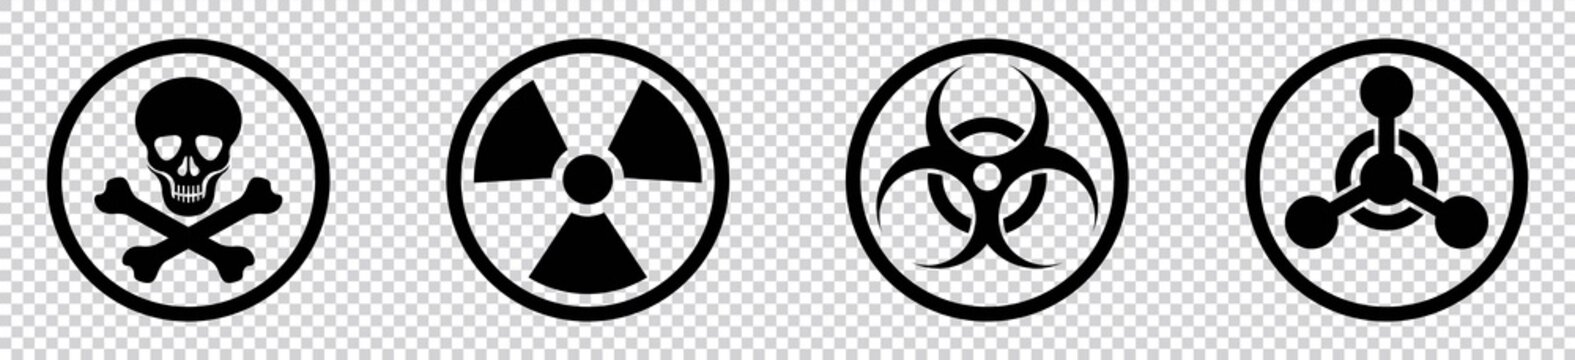 nuclear Radiation chemical biological icon set, Toxic sign, Biohazard symbol, Vector illustration